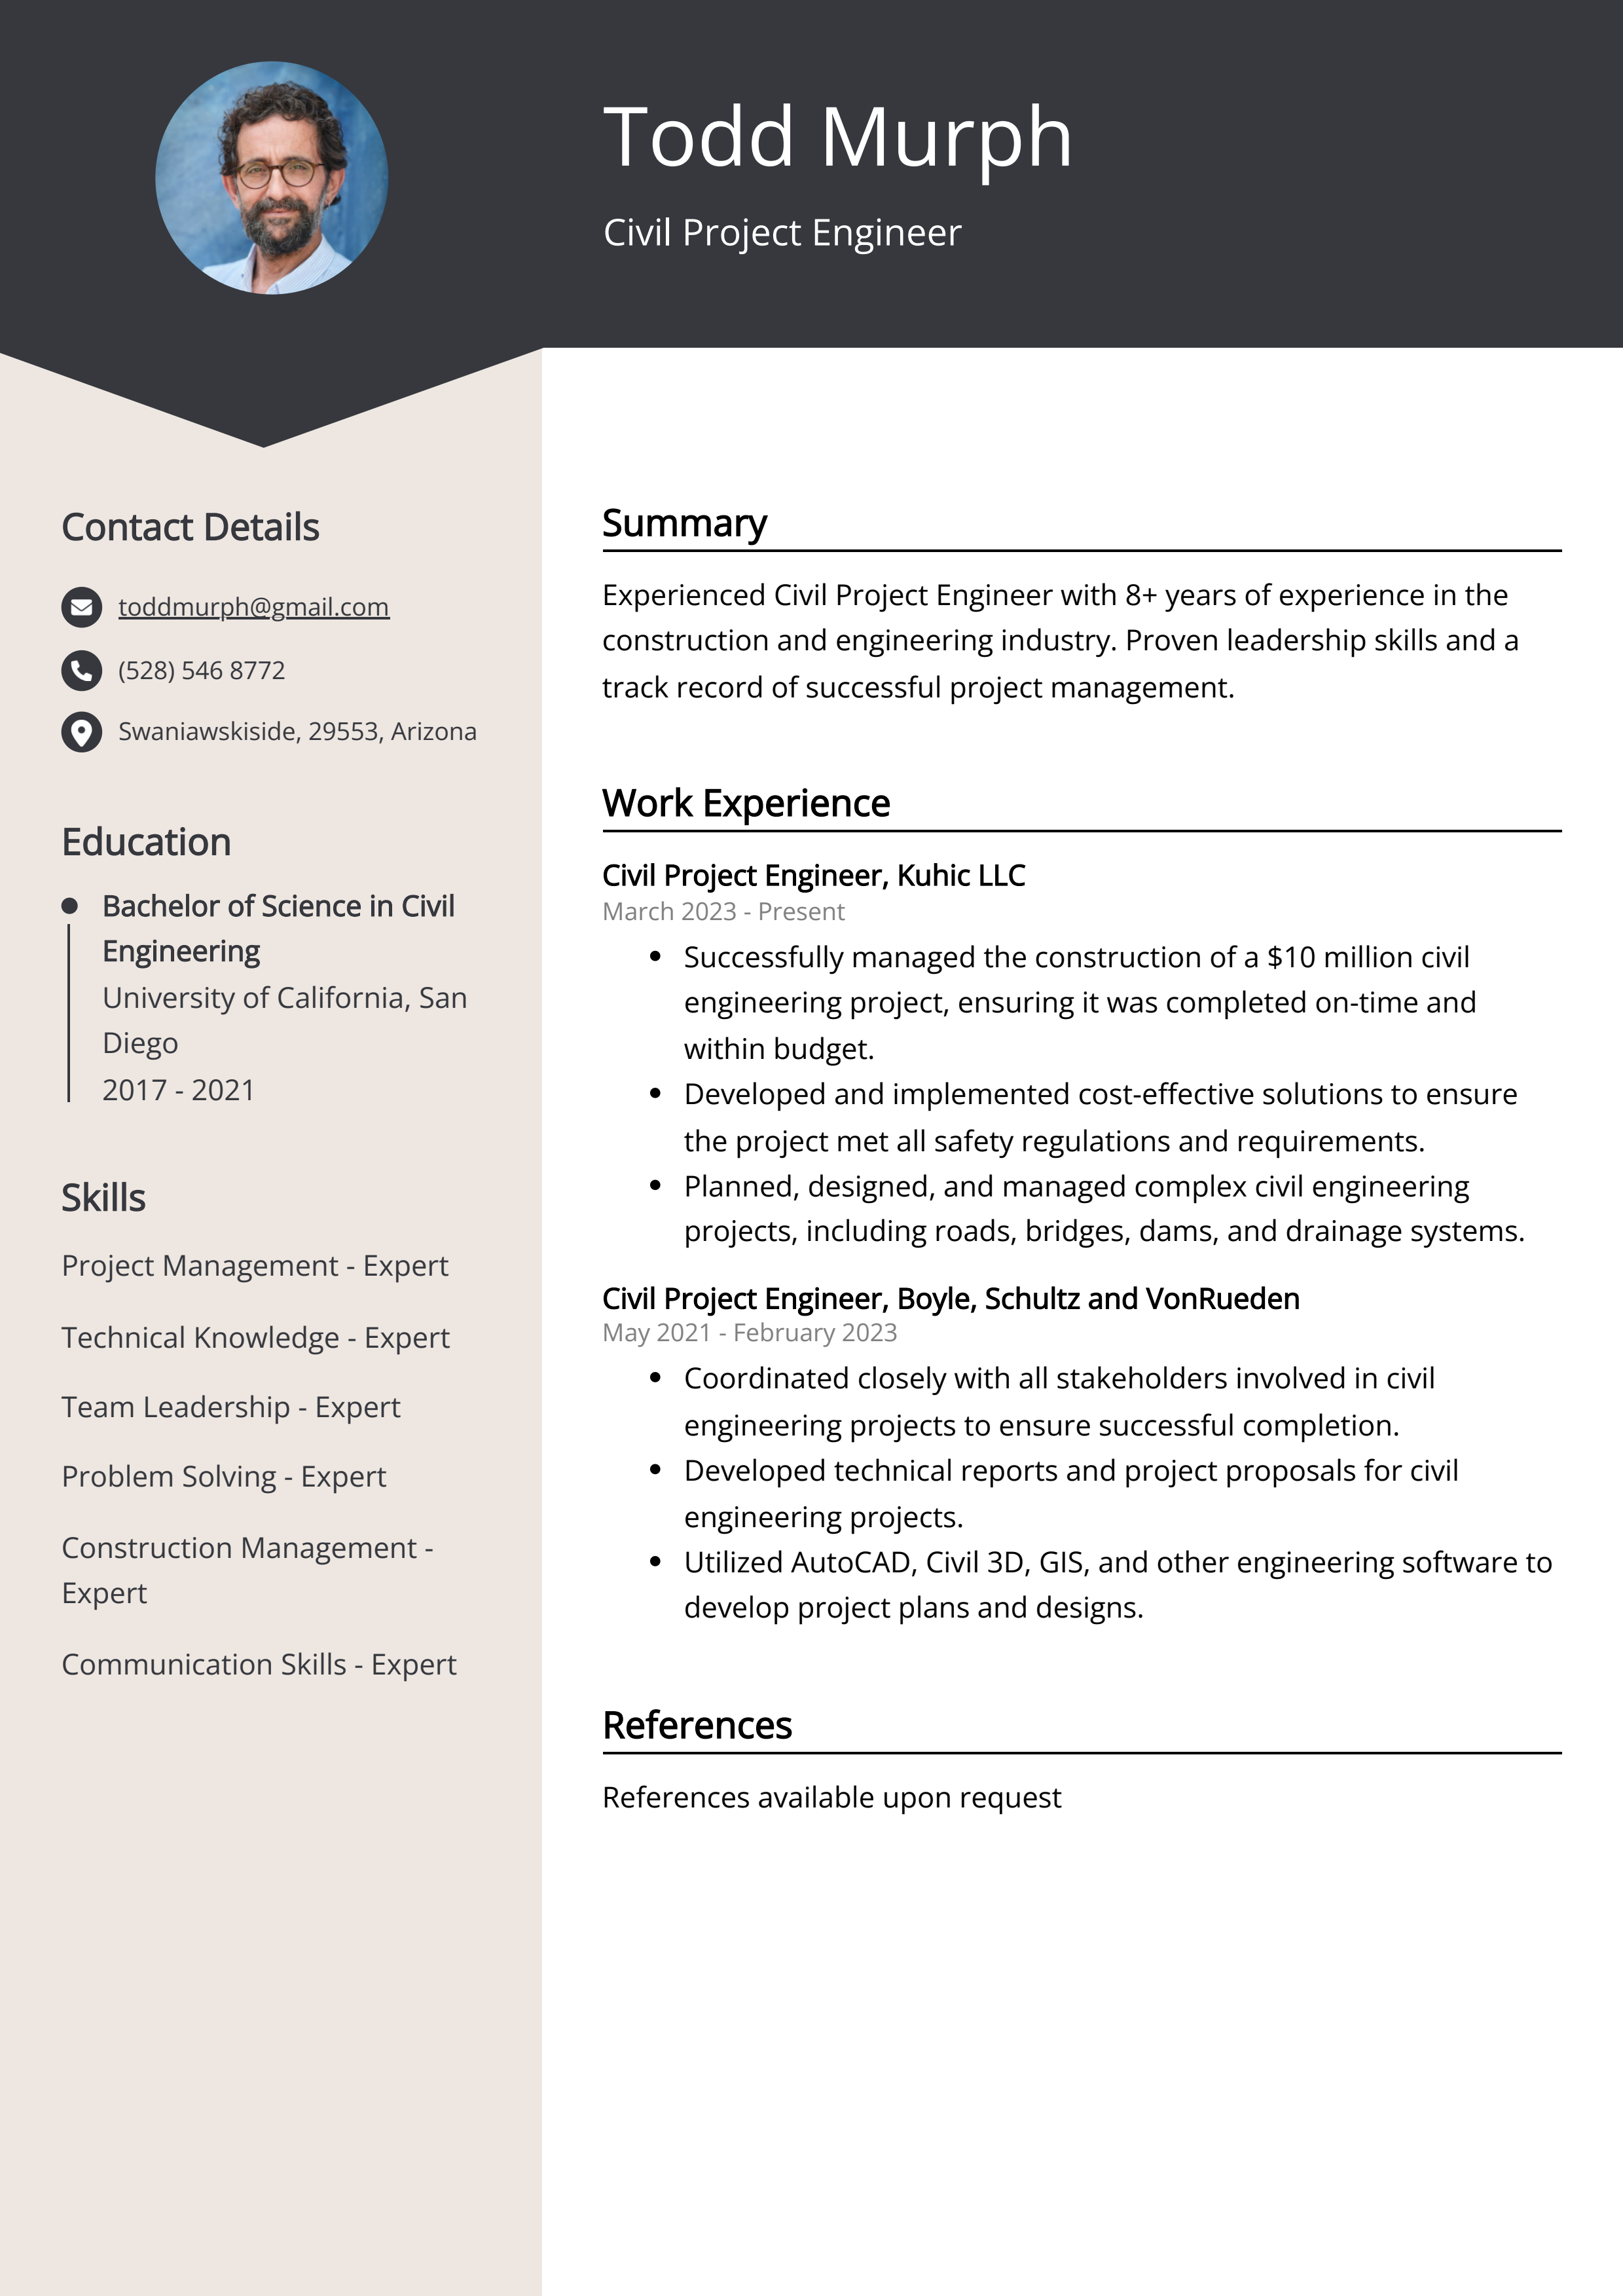 Civil Project Engineer Resume Example